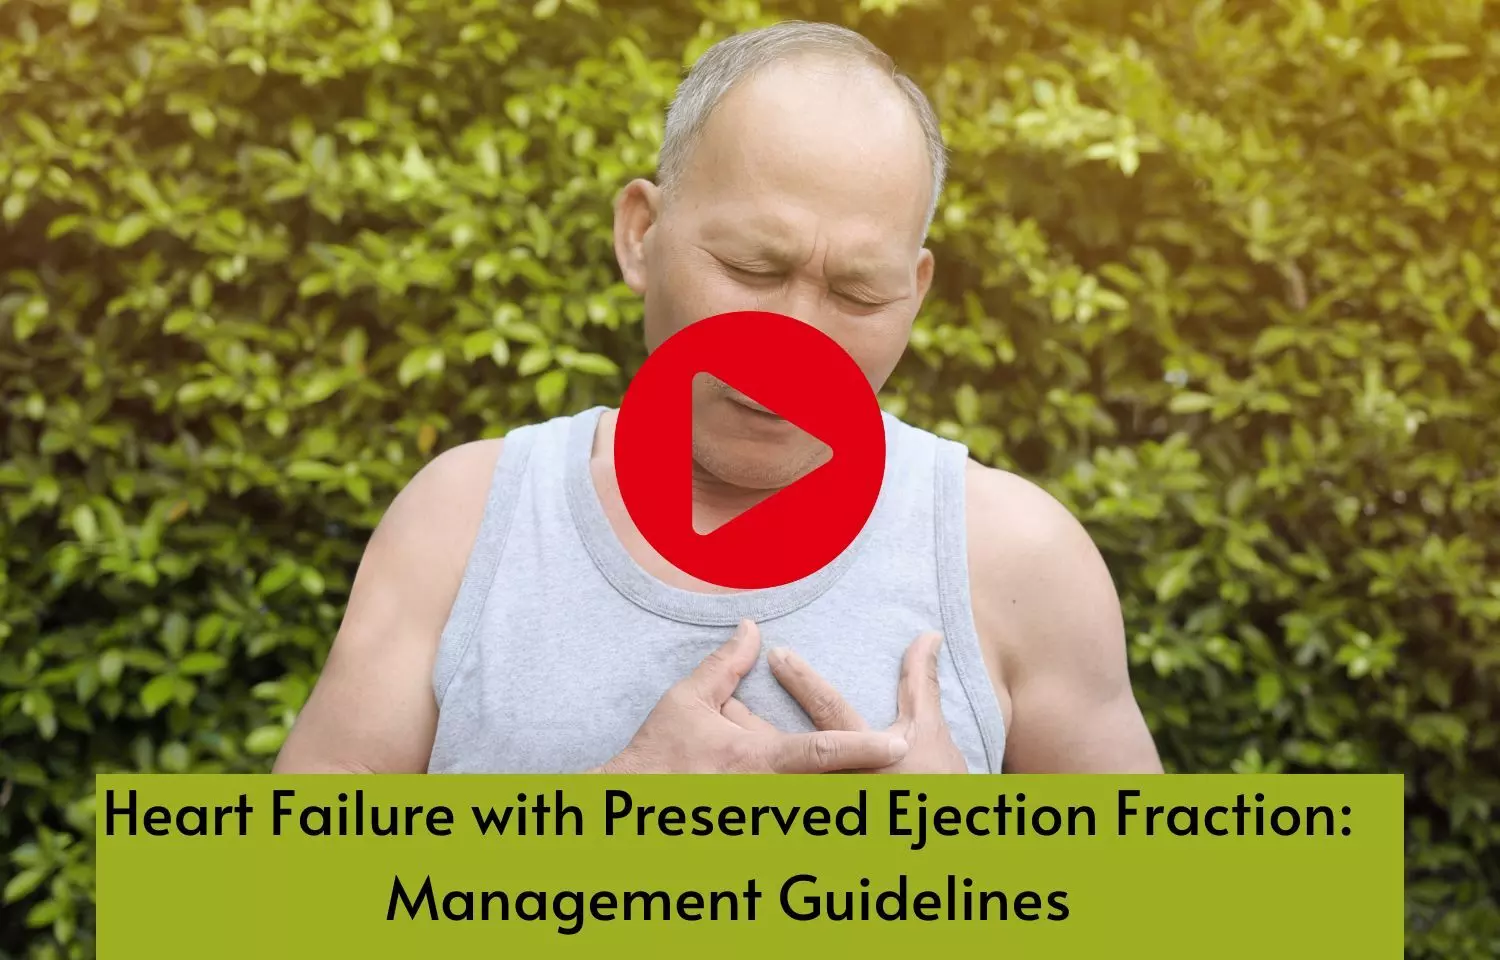 Heart Failure with Preserved Ejection Fraction: Management Guidelines